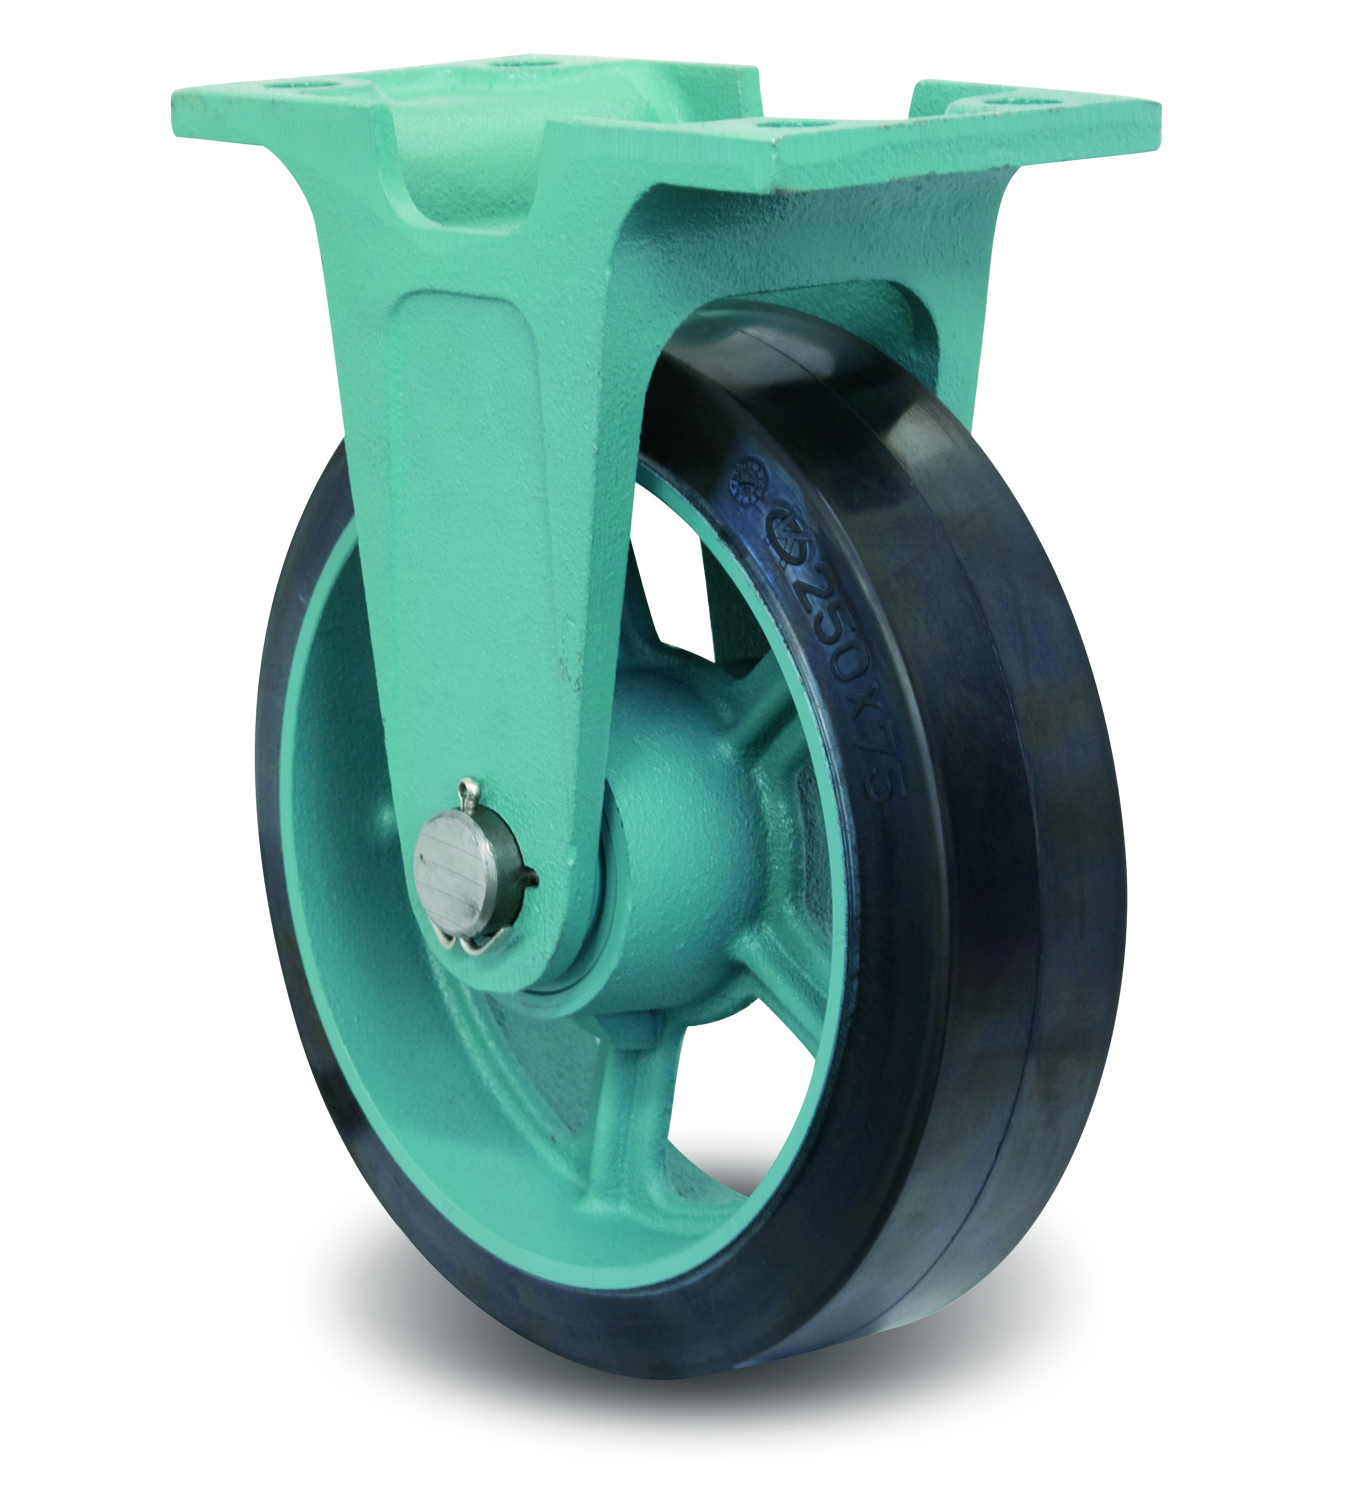 Ductile Caster Wide Type, Fixed MG-W Metal Fittings, E-MG-W (EMG-W200X90) 